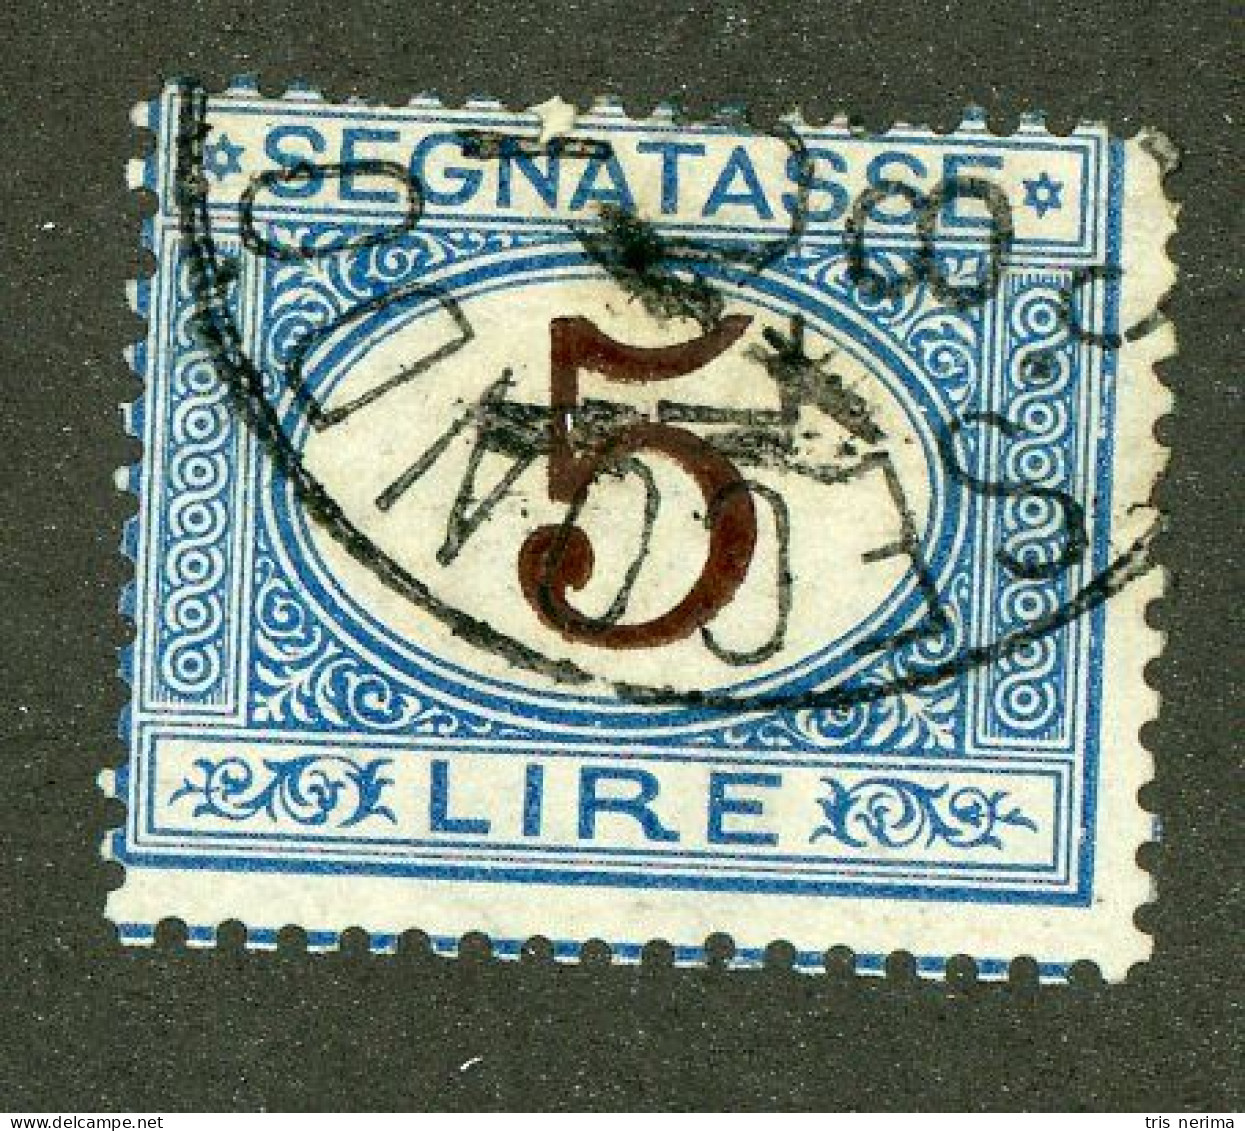 980 Italy 1870 Scott #J17 Used (Lower Bids 20% Off) - Postage Due